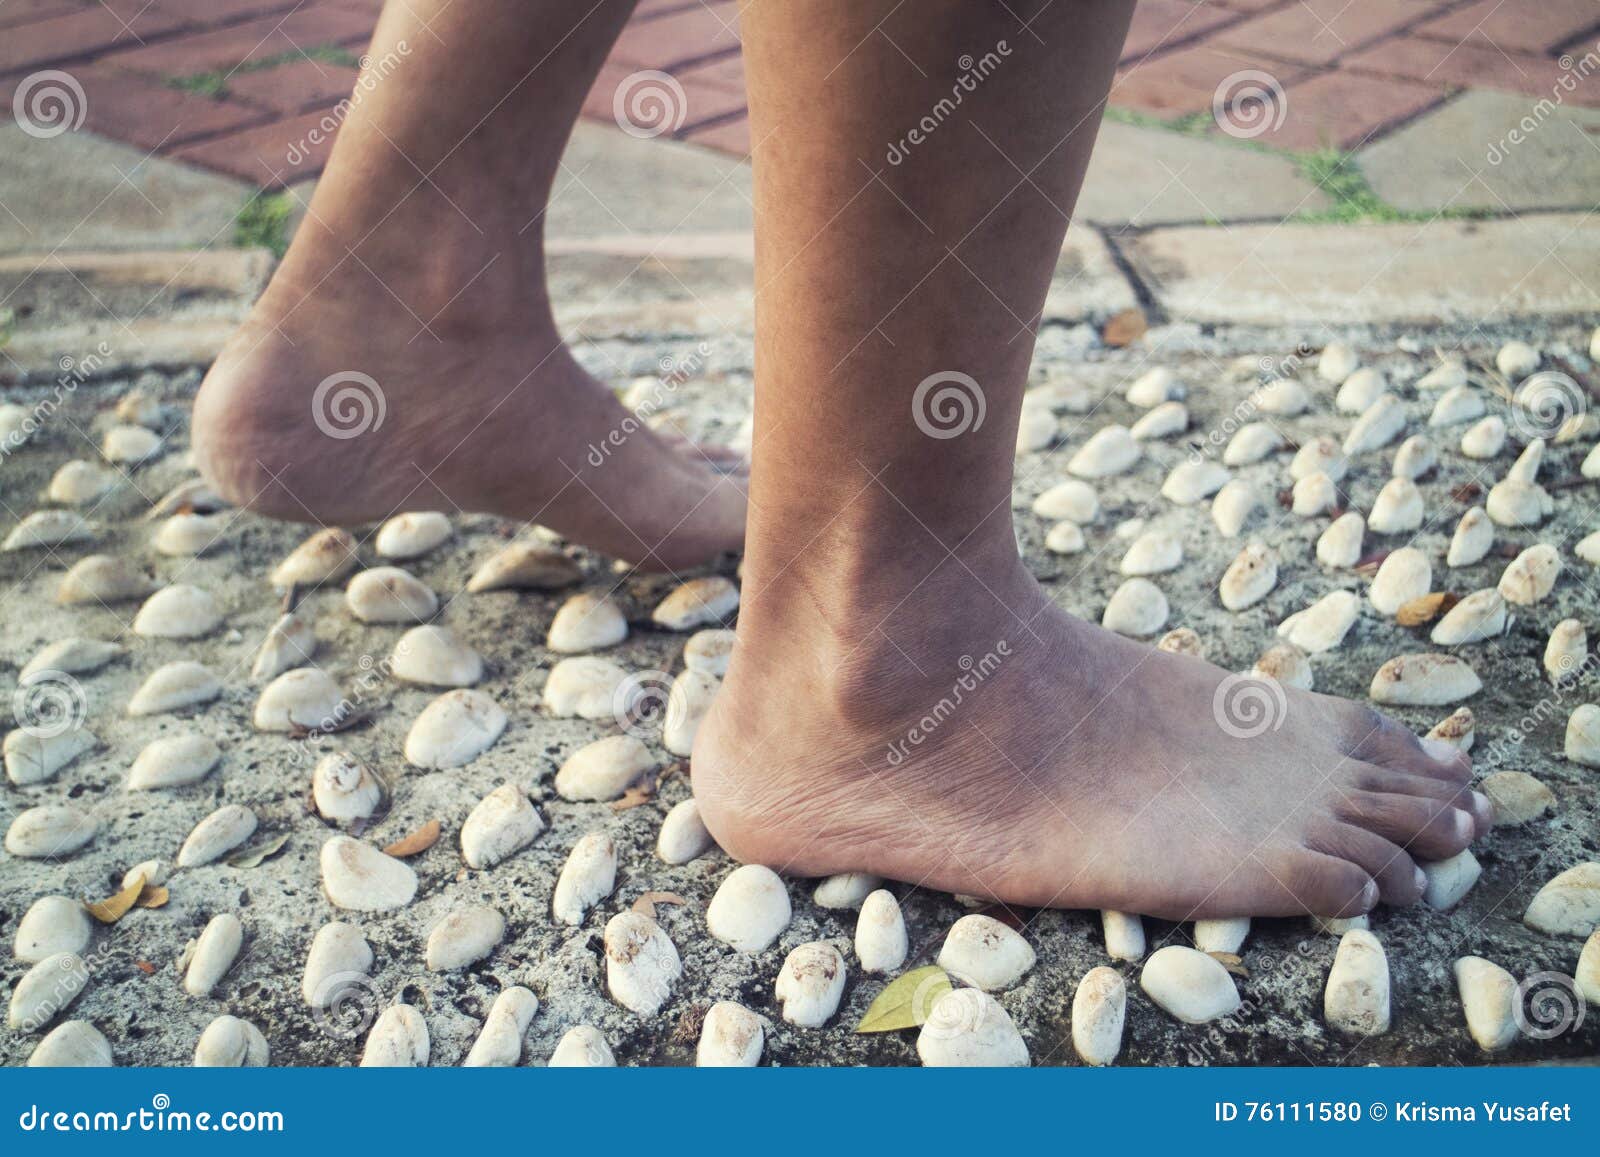 Barefoot at Cement Stone Track for Massage the Soles of the Feet from